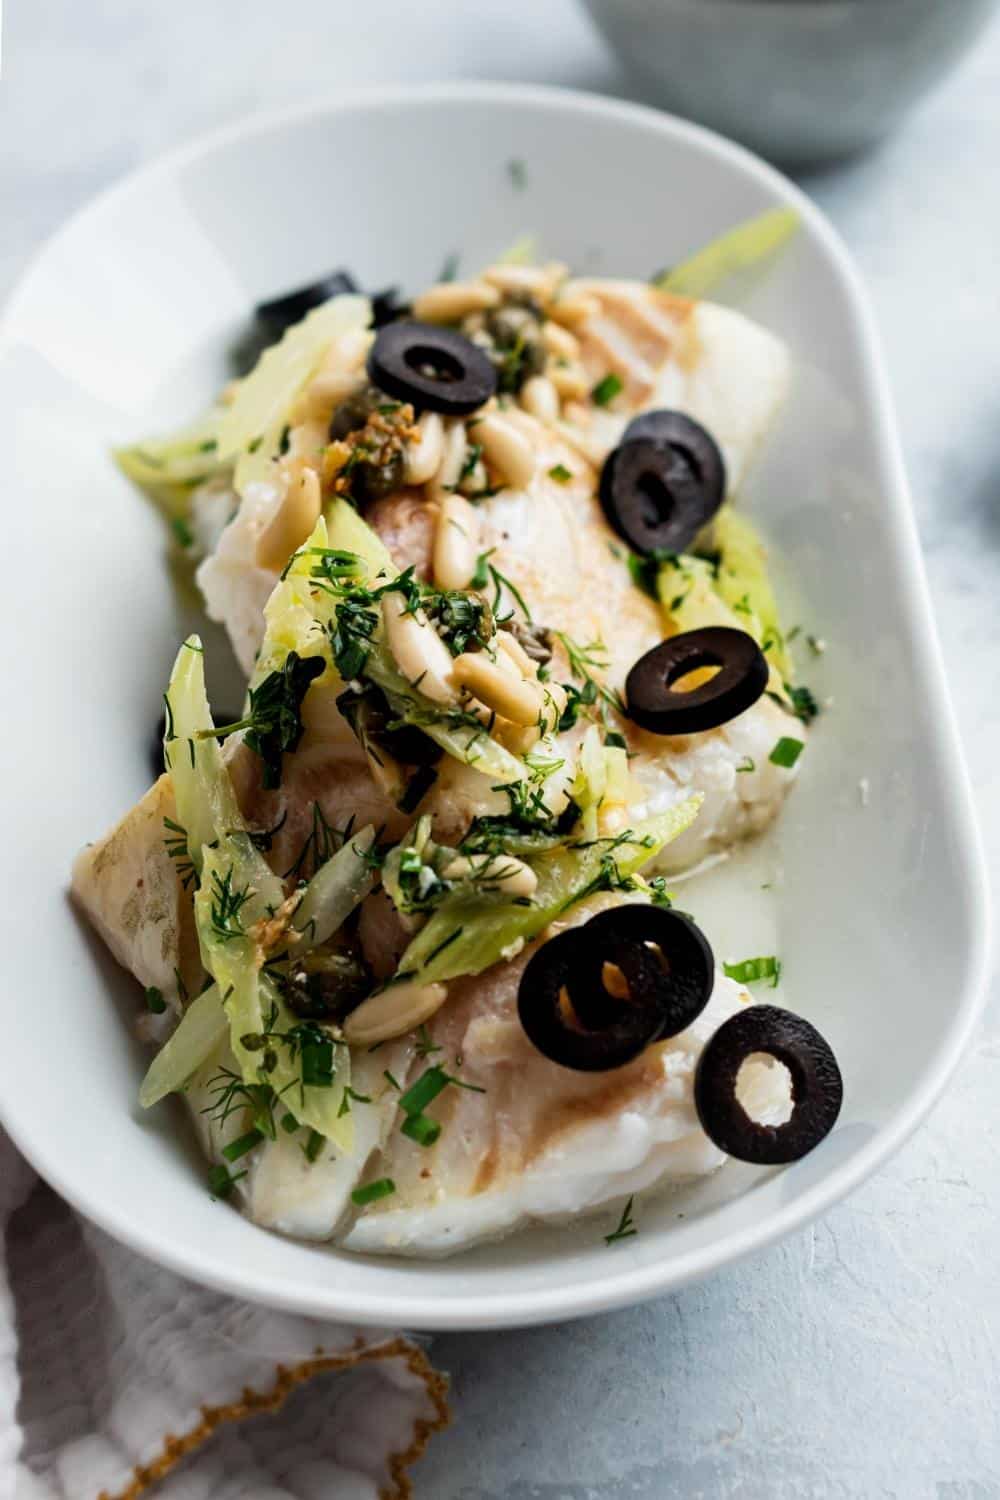 A bunch of pine nuts, black olives, and celery on top of halibut fillets.